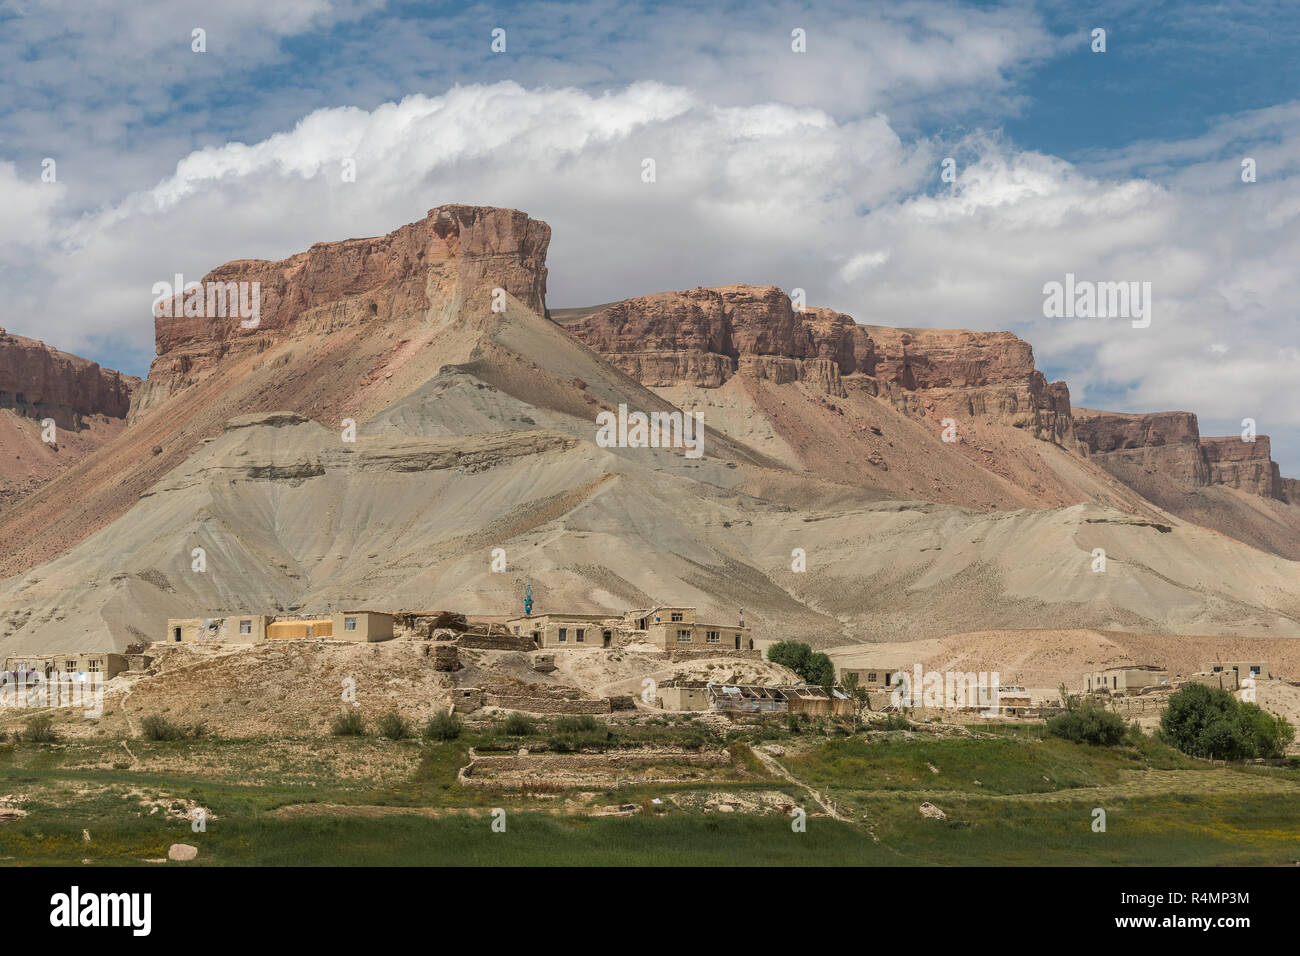 Scenery of Band-e-Amir lake in Afghanistan Stock Photo